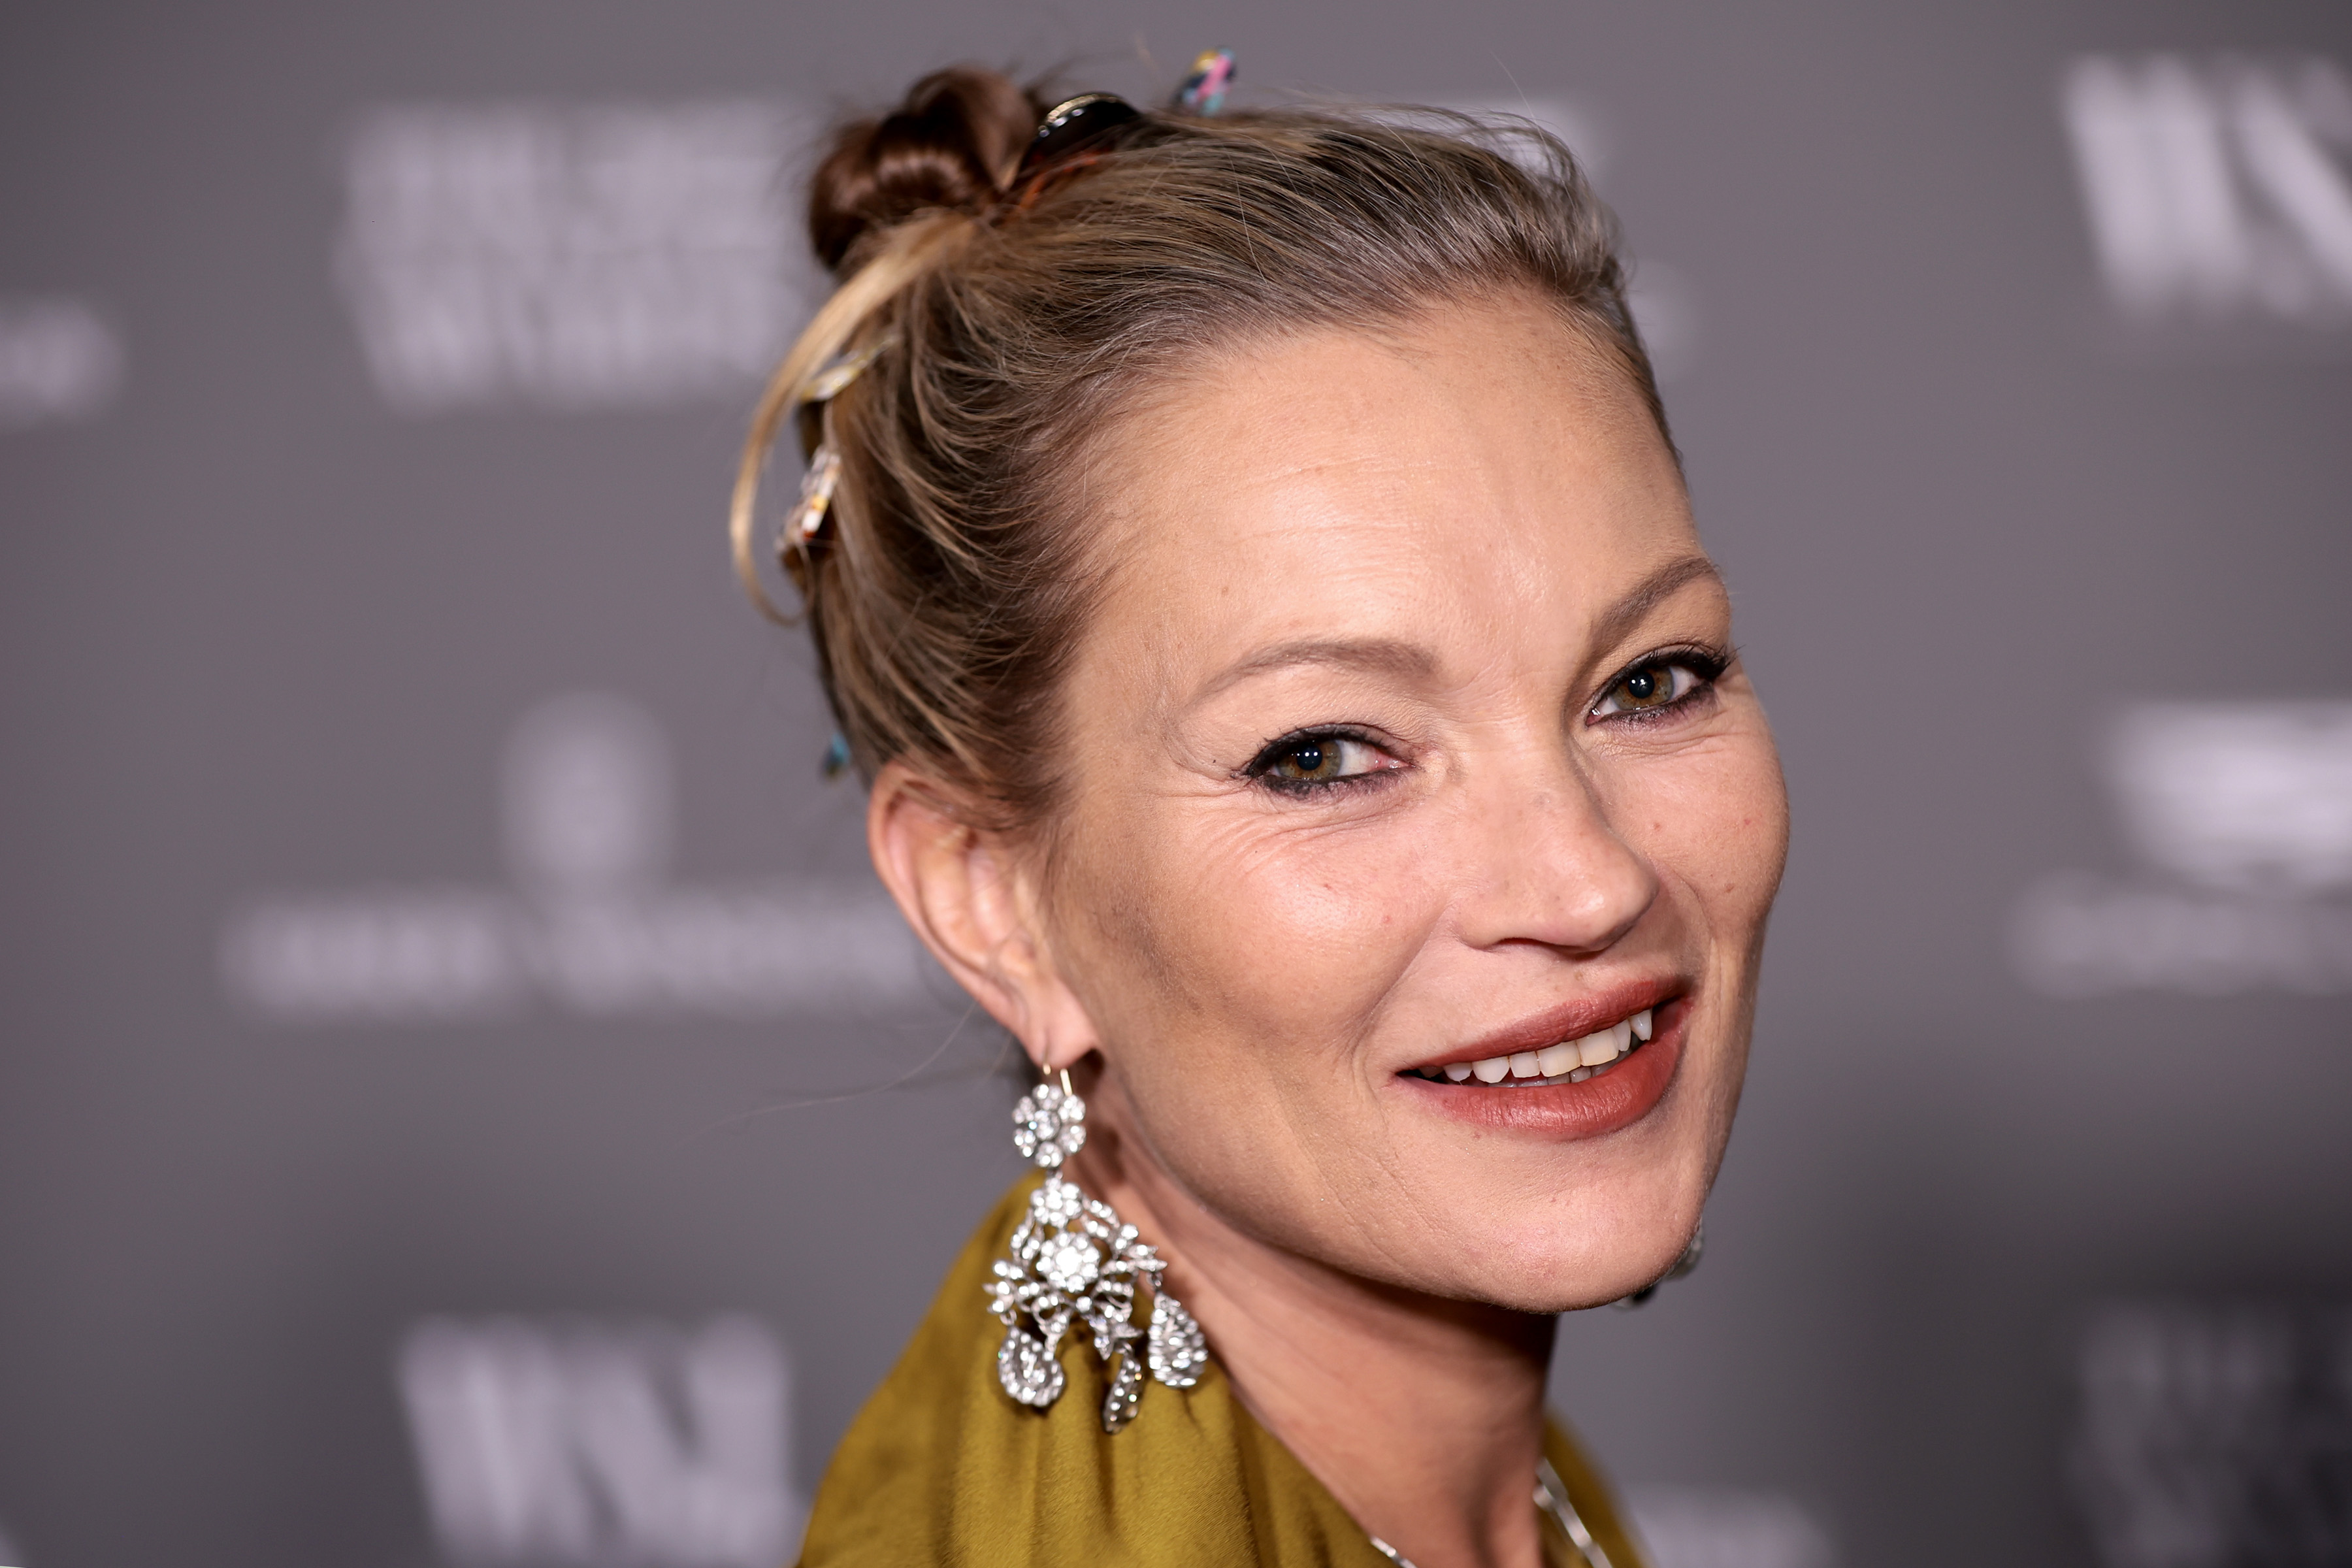 Kate Moss on November 02, 2022 in New York City. | Source: Getty Images